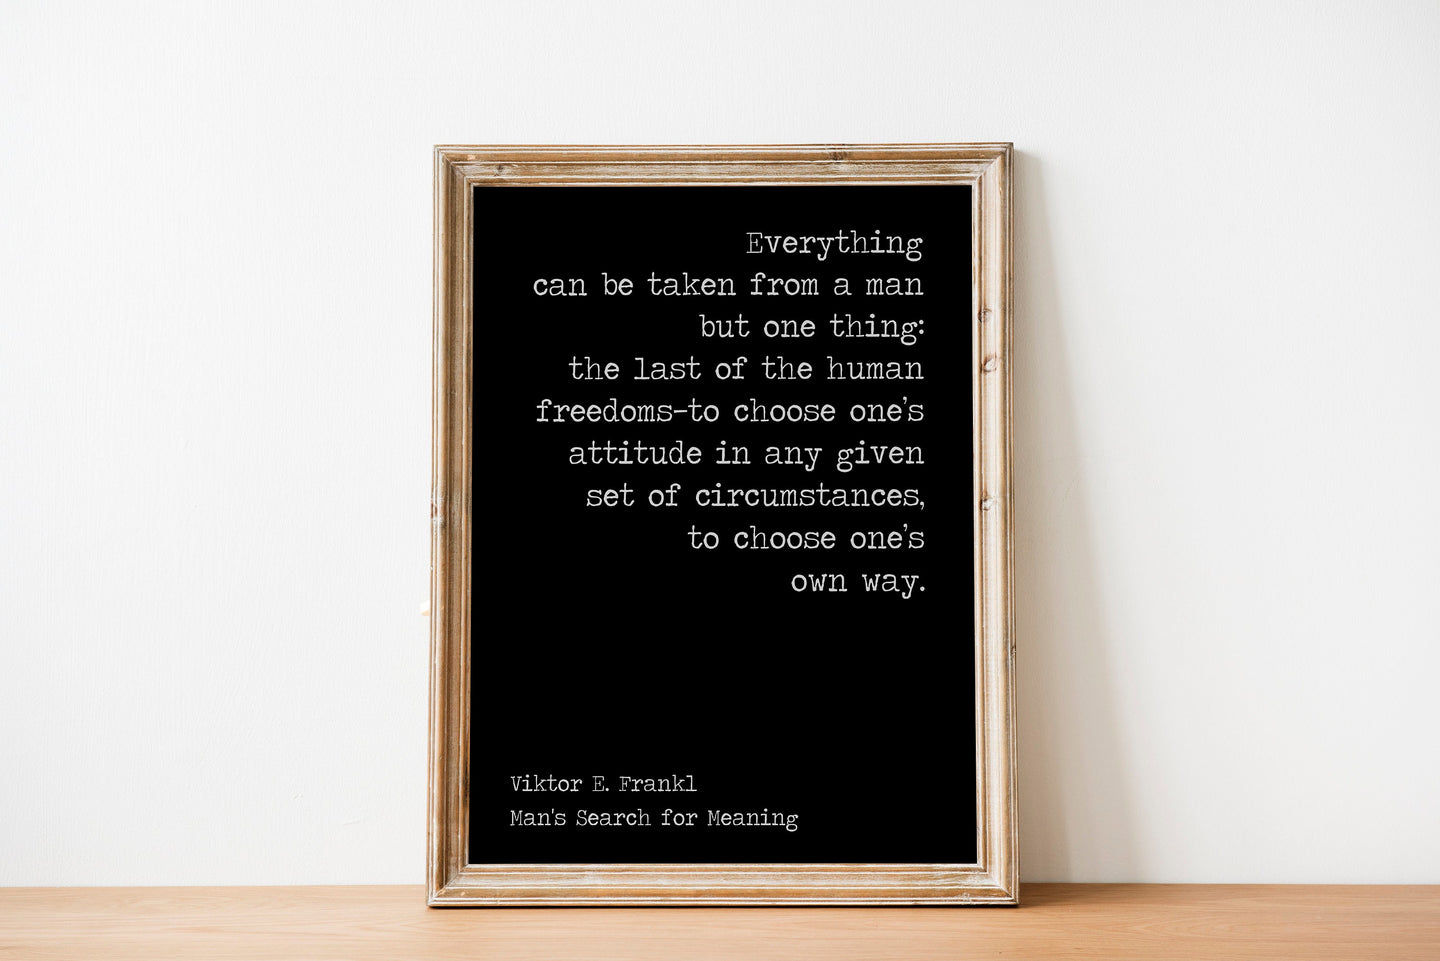 Viktor Frankl Quote - Man's Search for Meaning - Everything can be taken from a man office decor wall art UNFRAMED